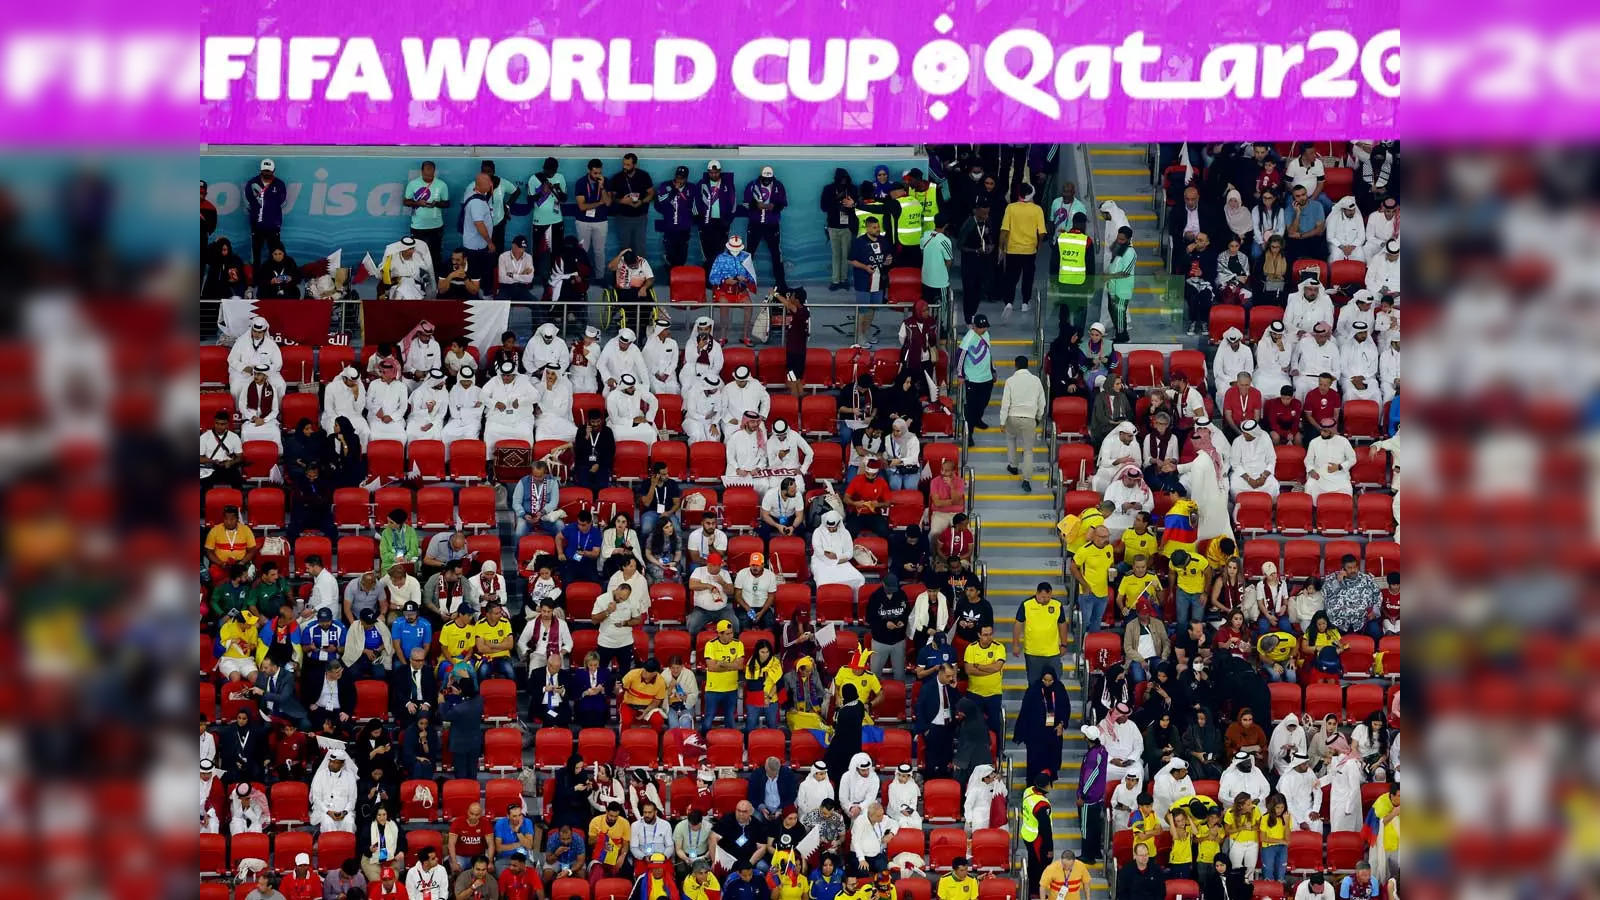 Cash is Emir: Qatar's Controversial World Cup –